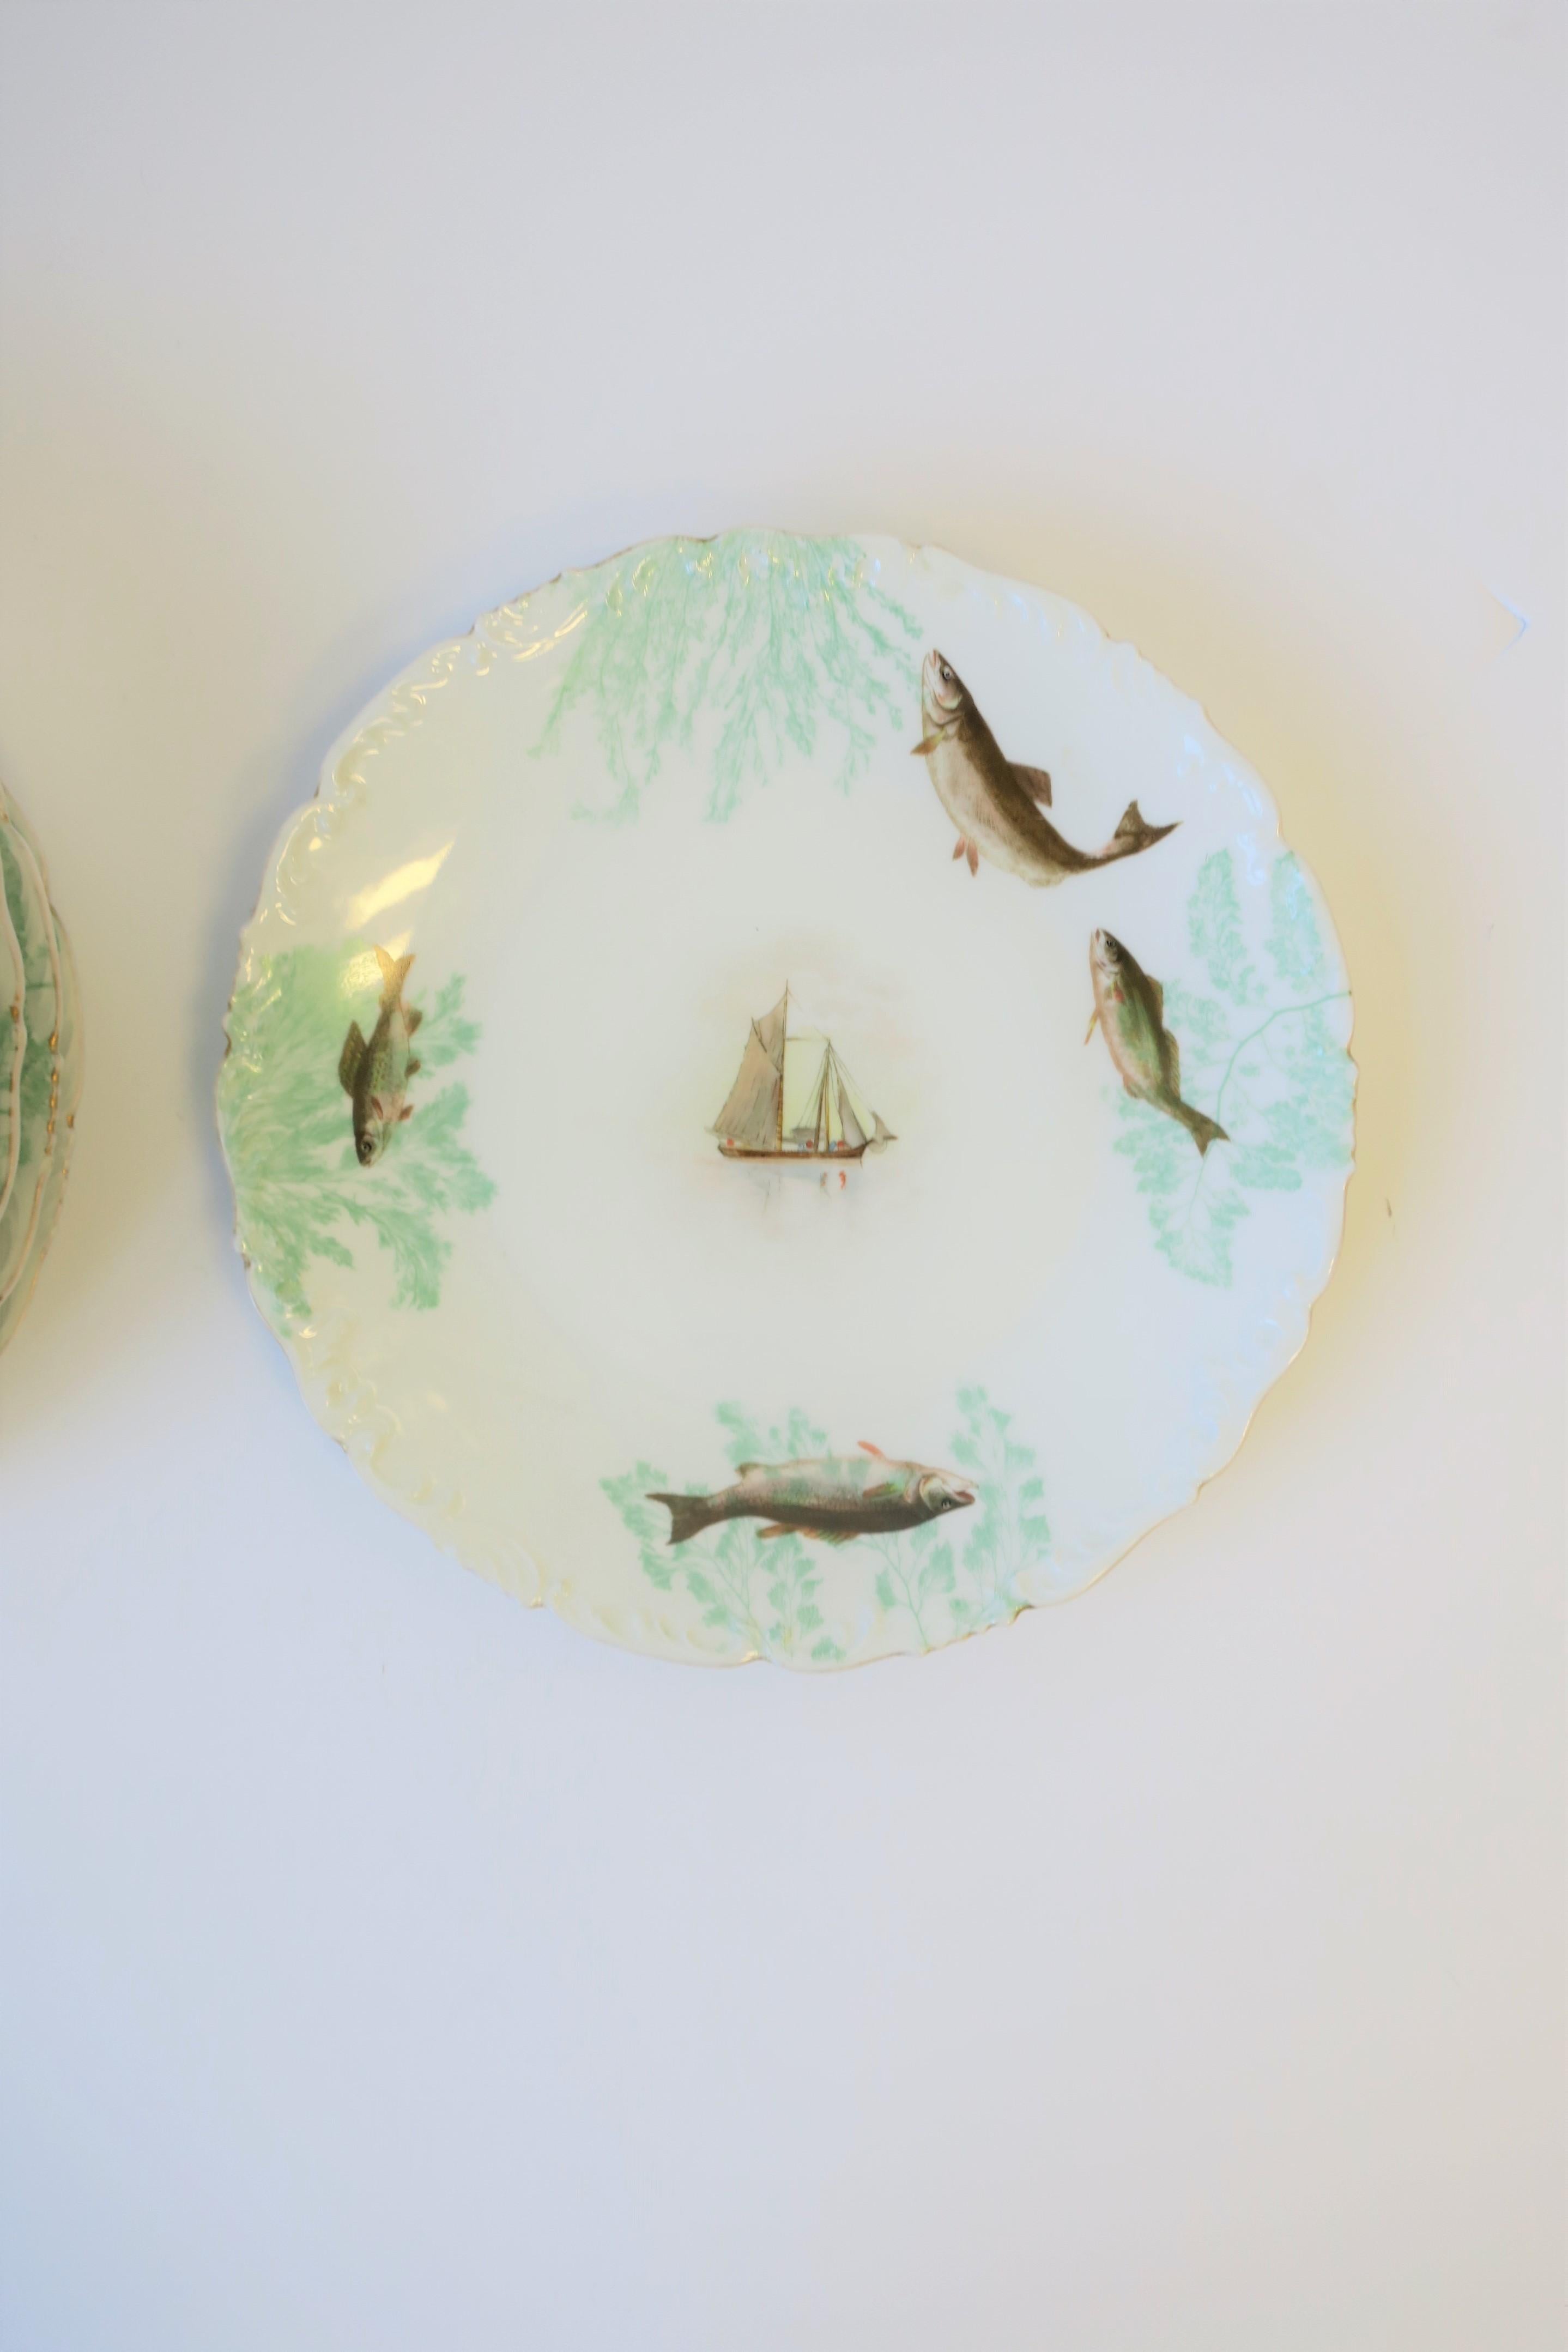 French Limoges Porcelain Dinner Plates with Rustic Fish & Boat Design, Set of 8 For Sale 1